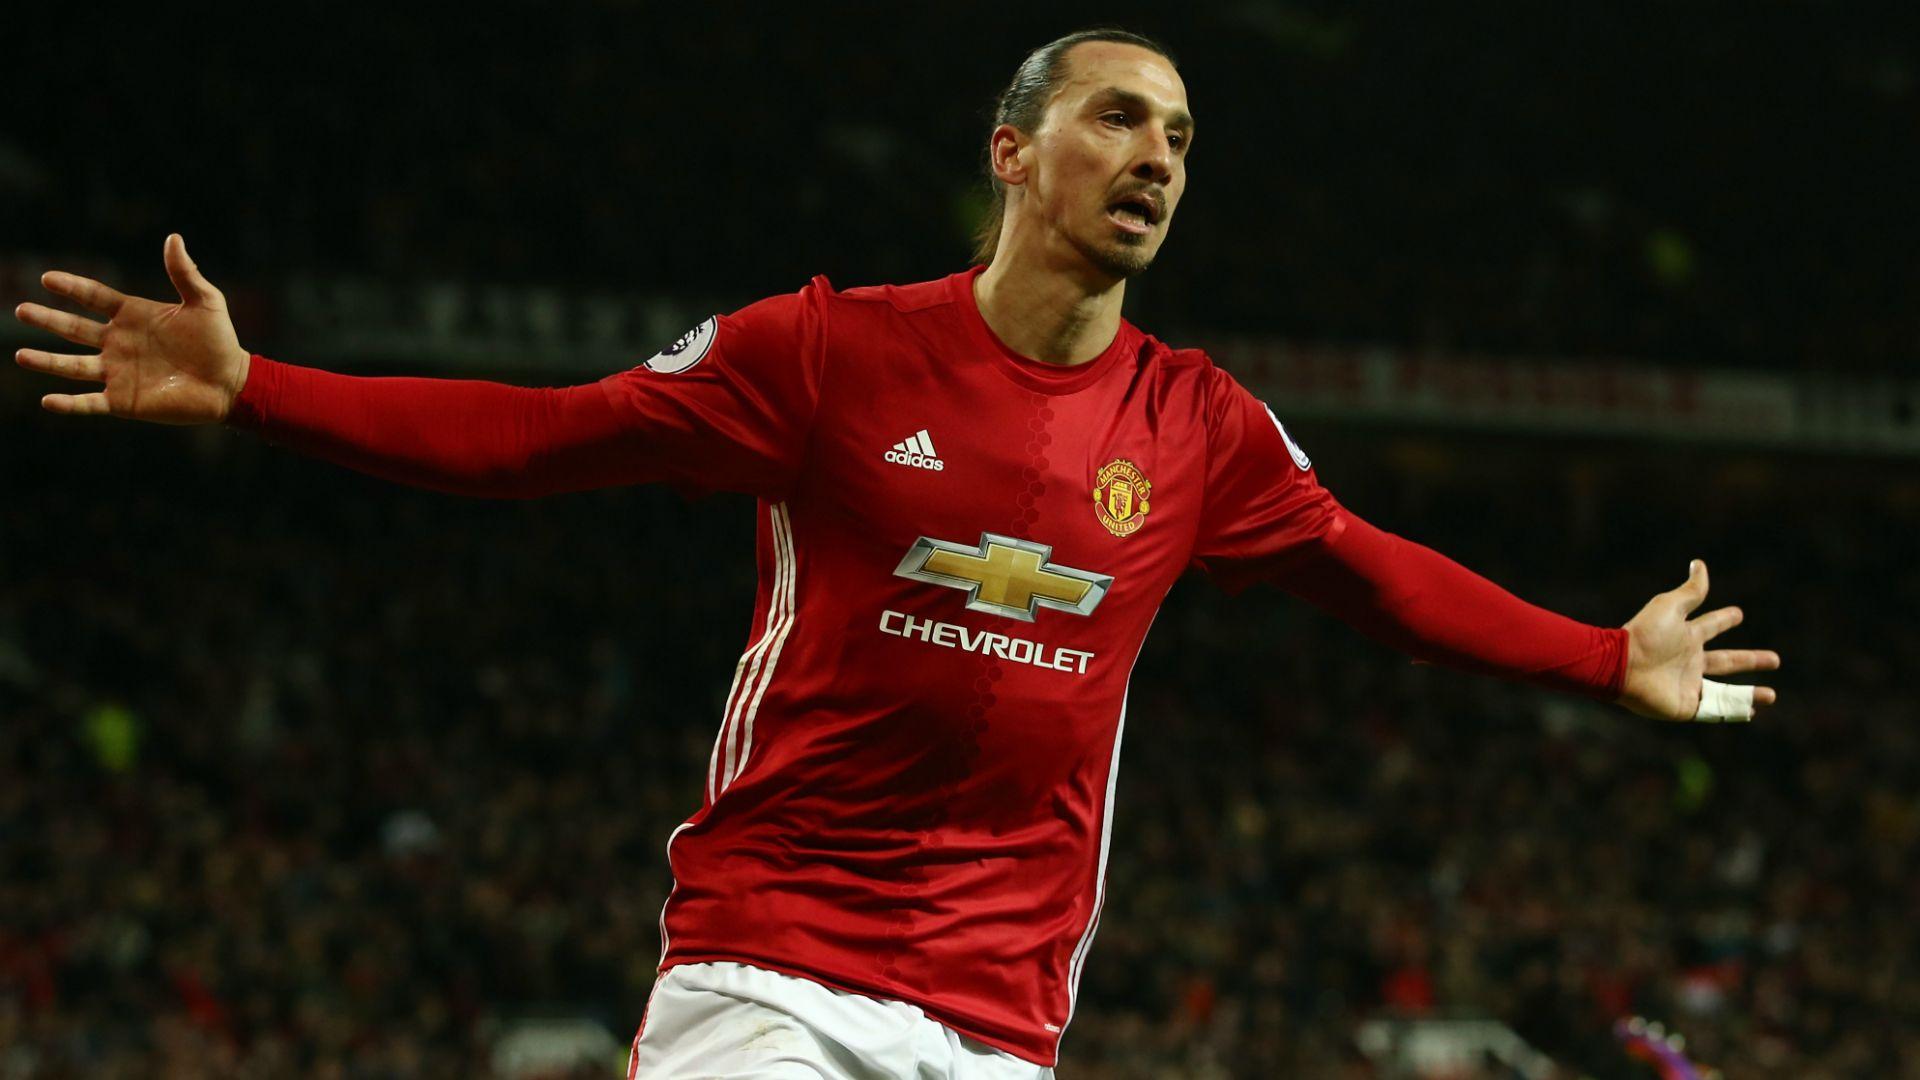 Ibrahimovic's New Year's resolution: More assists